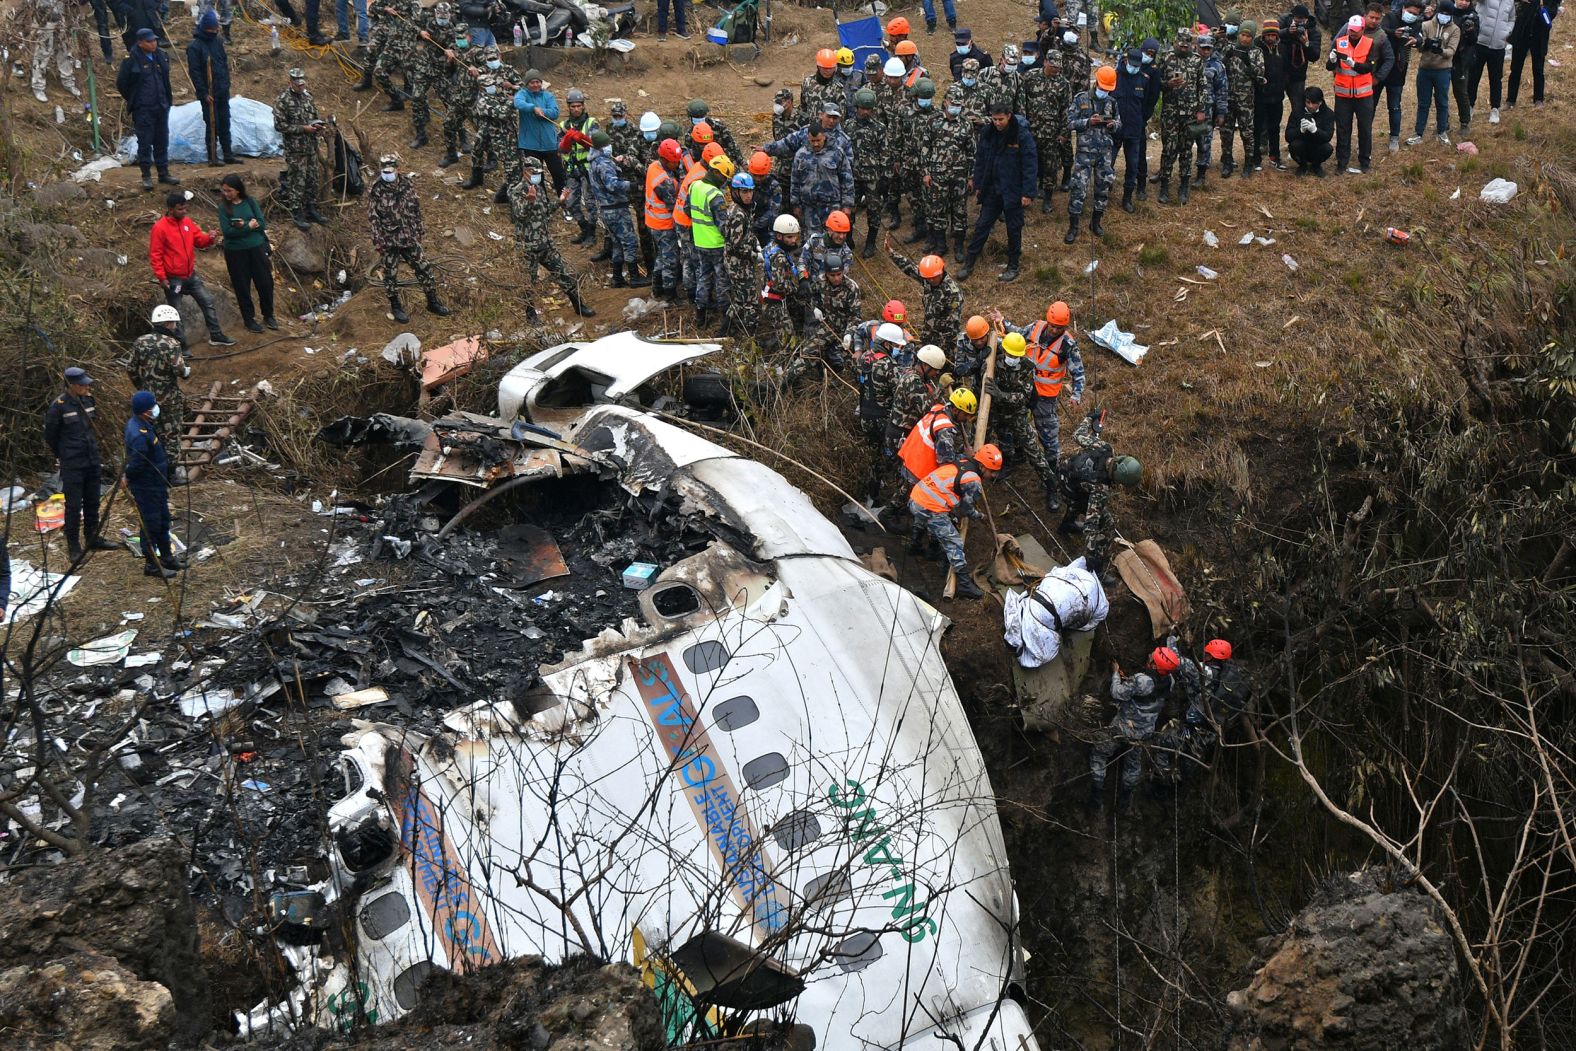 Rescuers pull the body of a victim who died in a <a href="https://www.cnn.com/2023/01/17/asia/nepal-plane-crash-yeti-airlines-video-intl-hnk/index.html" target="_blank">Yeti Airlines plane crash</a> in Pokhara, Nepal, on Monday, January 16. There were 72 people on board, including four crew members, according to an airline spokesperson. With all but one body recovered, the crash marks the country's <a href="https://www.cnn.com/2023/01/15/asia/nepal-air-travel-risks-intl/index.html" target="_blank">deadliest air disaster</a> in more than 30 years.